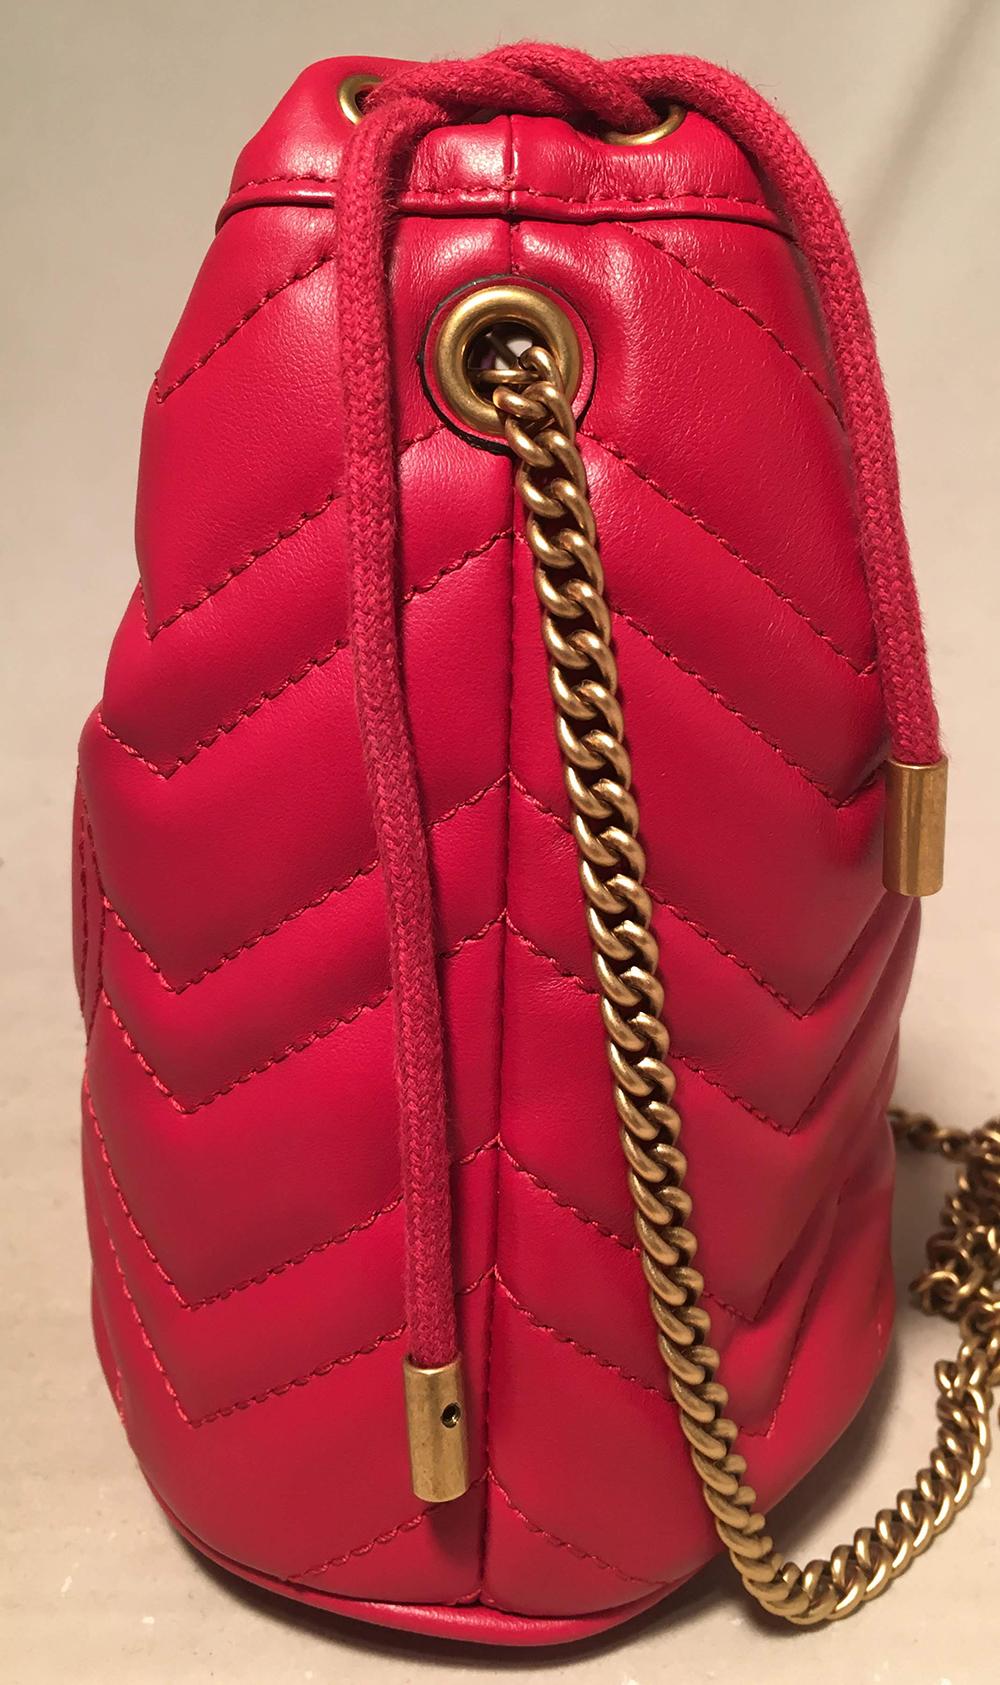 Gucci GG Marmont Mini Quilted Red Leather Bucket Bag in NWOT condition. Red chevron quilted leather exterior trimmed with bronze hardware. Signature bronze GG gucci logo along front side and adorable quilted heart along back. Removable bronze chain